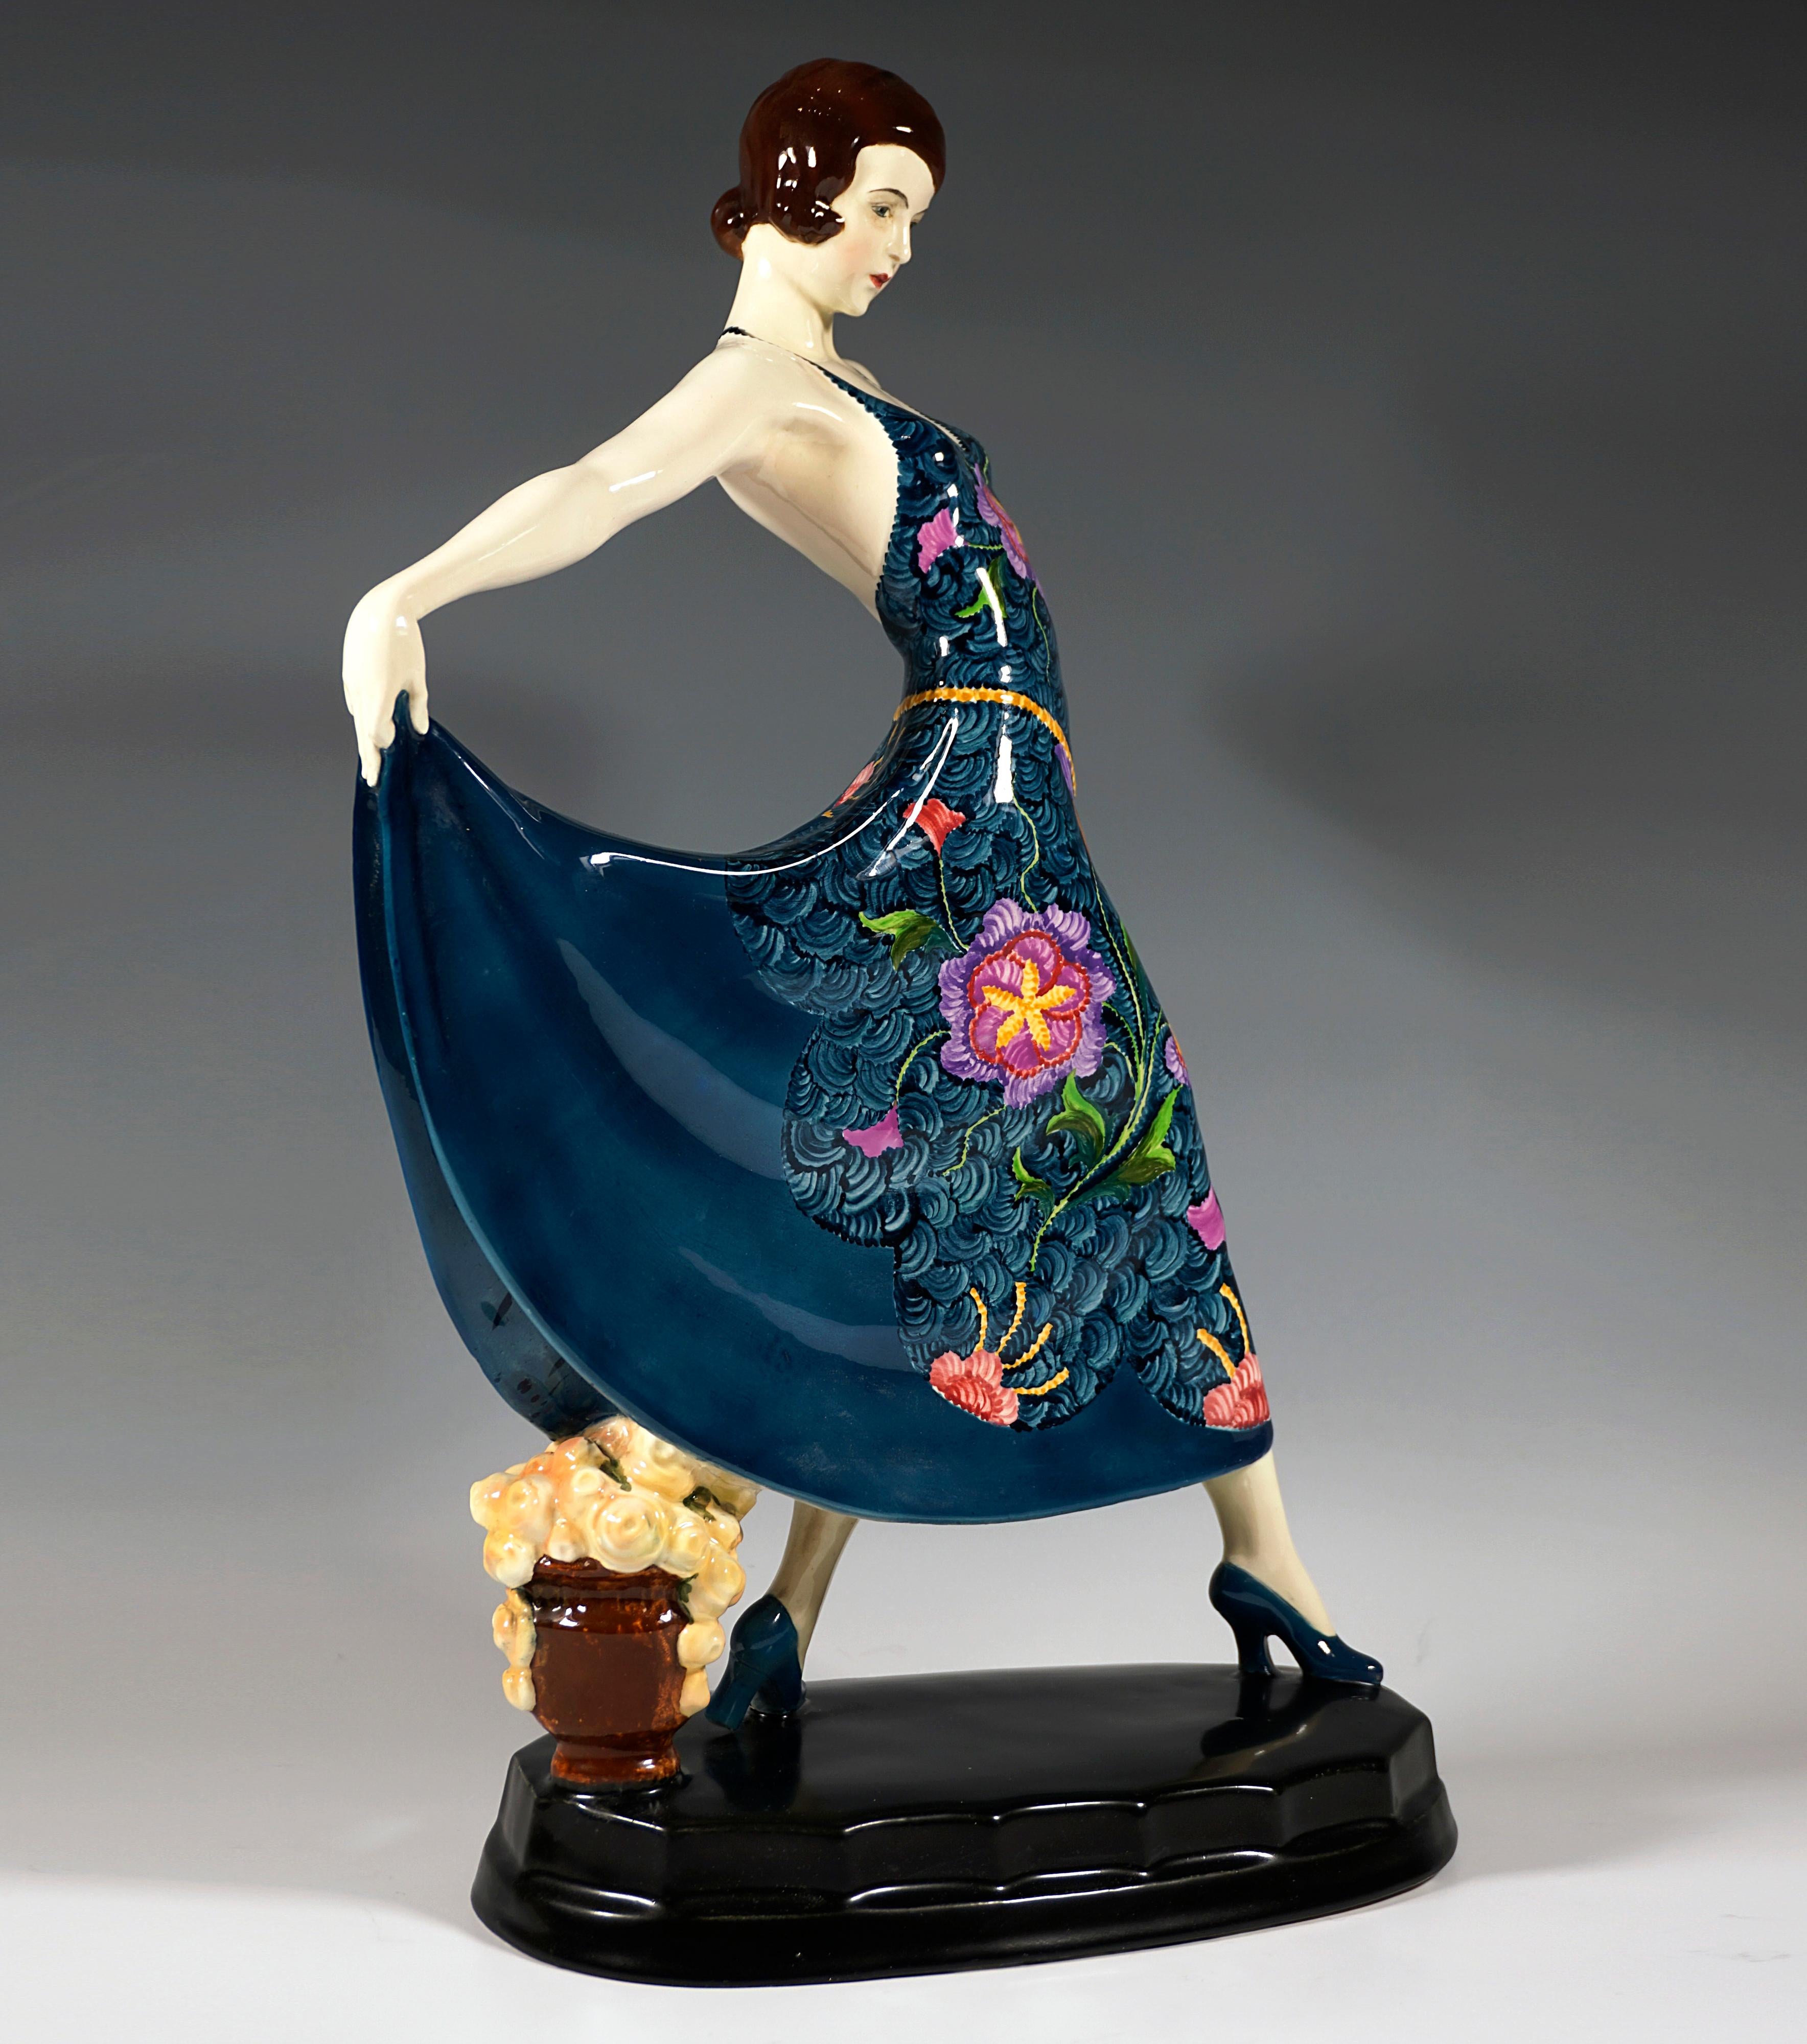 Rare Goldscheider Art Ceramic Figurine Of The 1920s:
Depiction of the actress and dancer Lilian Harvey wearing a dark wig and striding in a long, at the back low-cut dress decorated with an elaborate floral pattern, holding her skirt up behind her